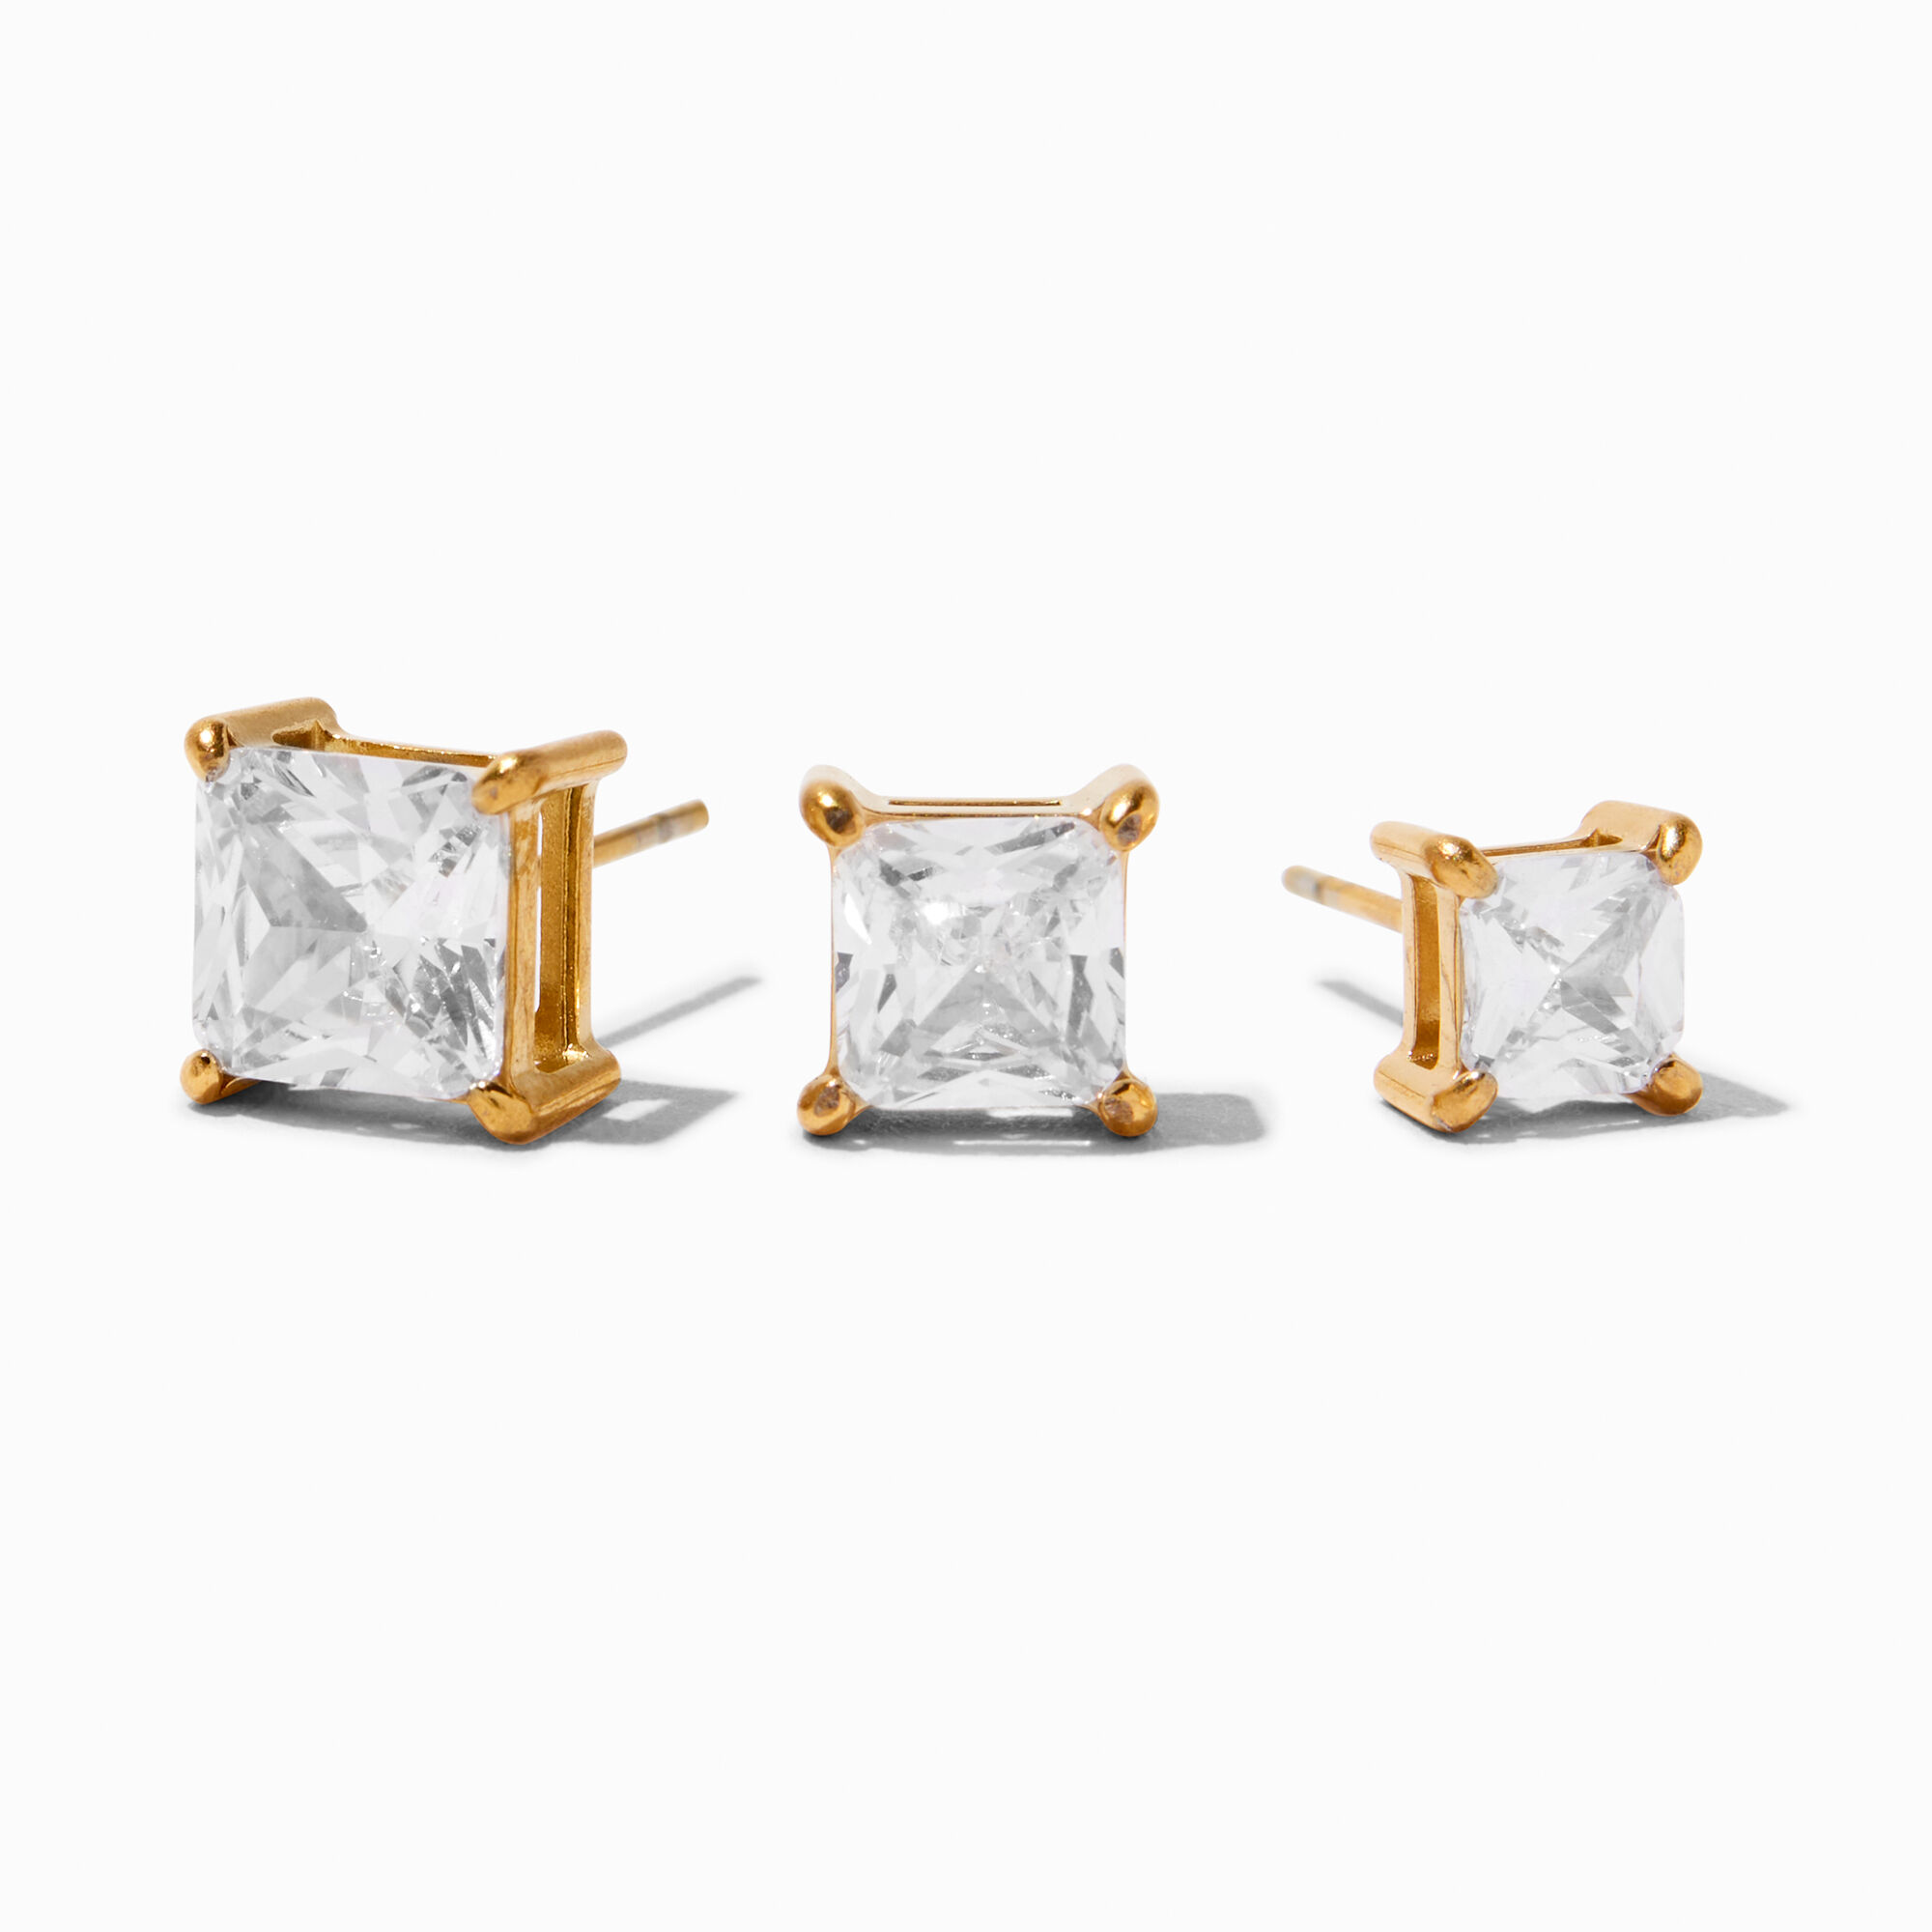 View Claires Tone Stainless Steel Cubic Zirconia 5MM6MM7MM Square Stud Earrings 3 Pack Gold information